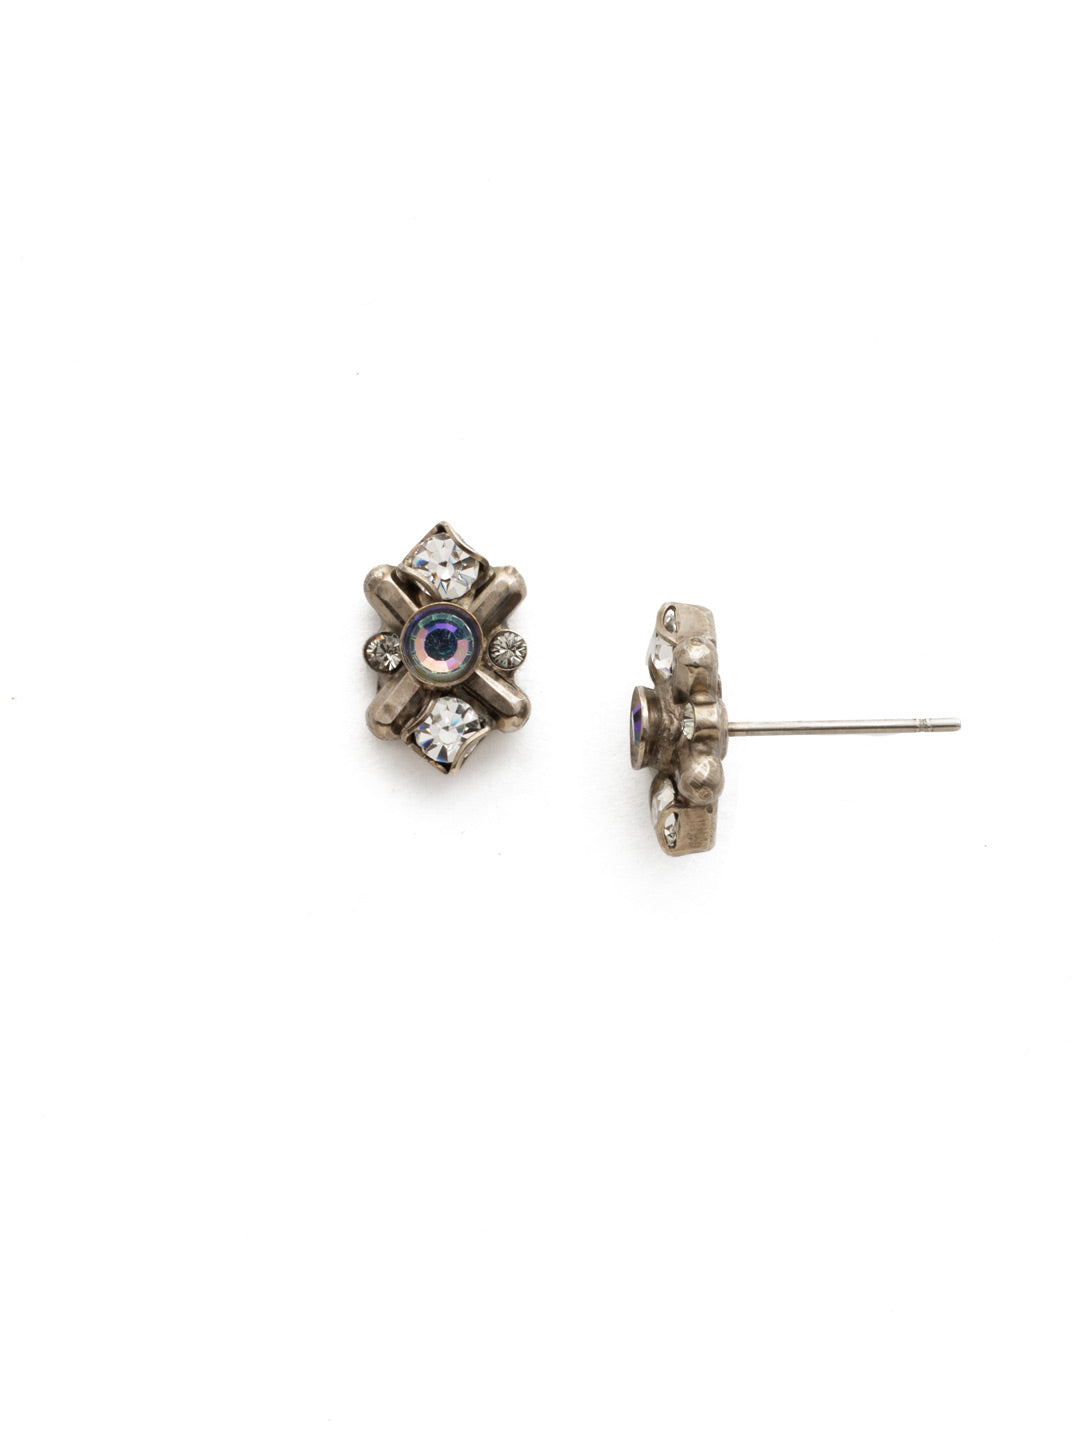 Aralia Stud Earrings - EDX3ASBLT - A small round crystal lays at the center of a metal X formation with delicate gems placed all around. From Sorrelli's Black Tie collection in our Antique Silver-tone finish.